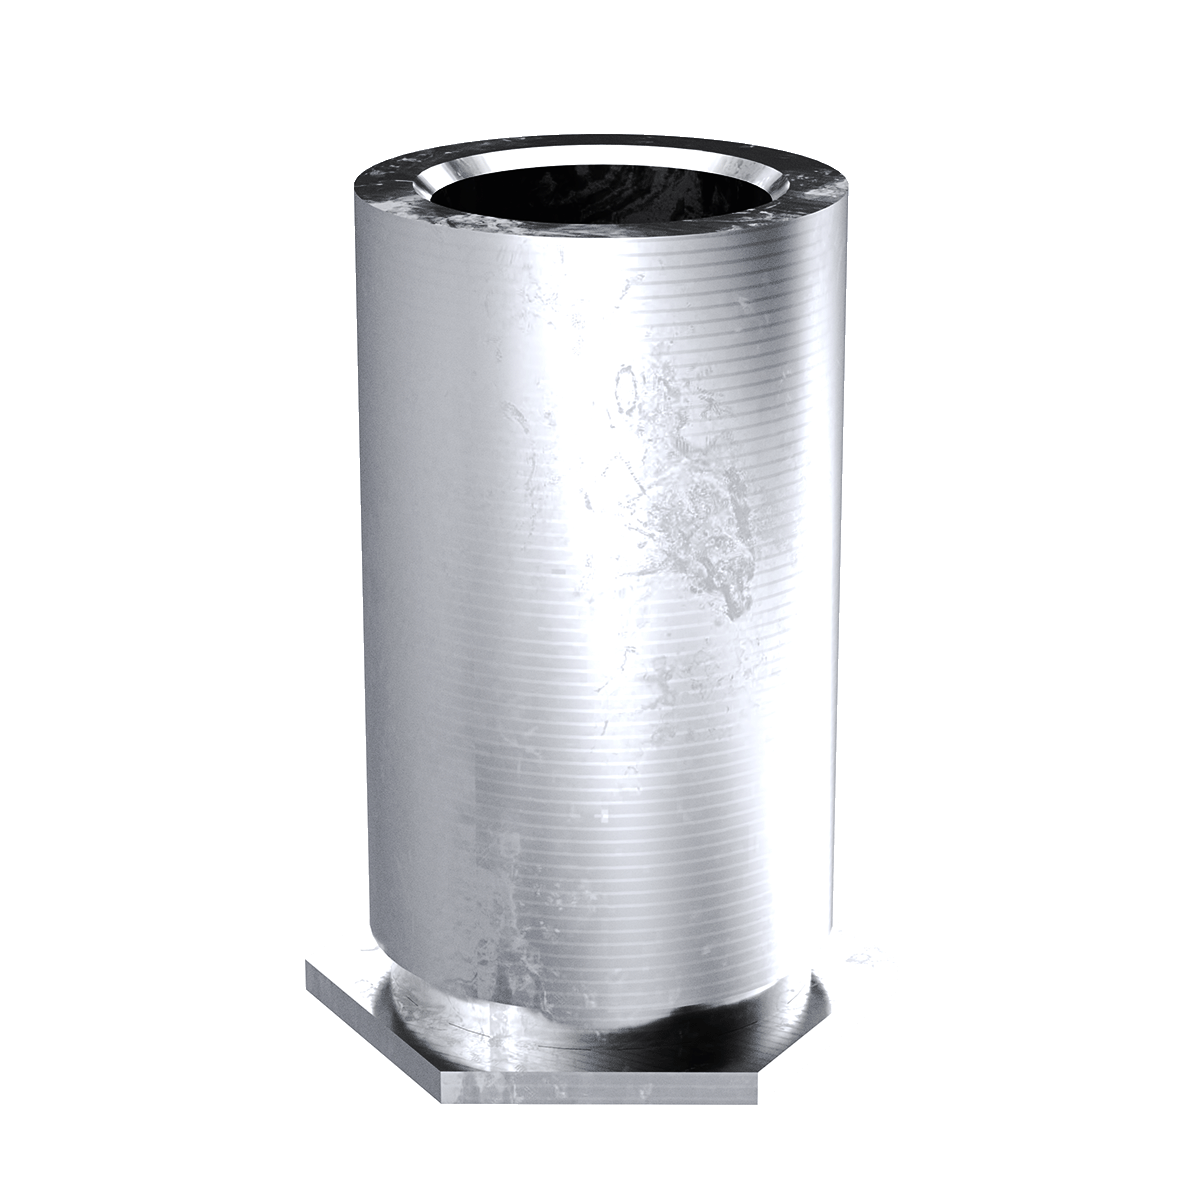 Self-Clinching Standoff, Through Unthreaded, 300 Series Stainless Steel, Passivated, 4.1 x 14, 100 Pack